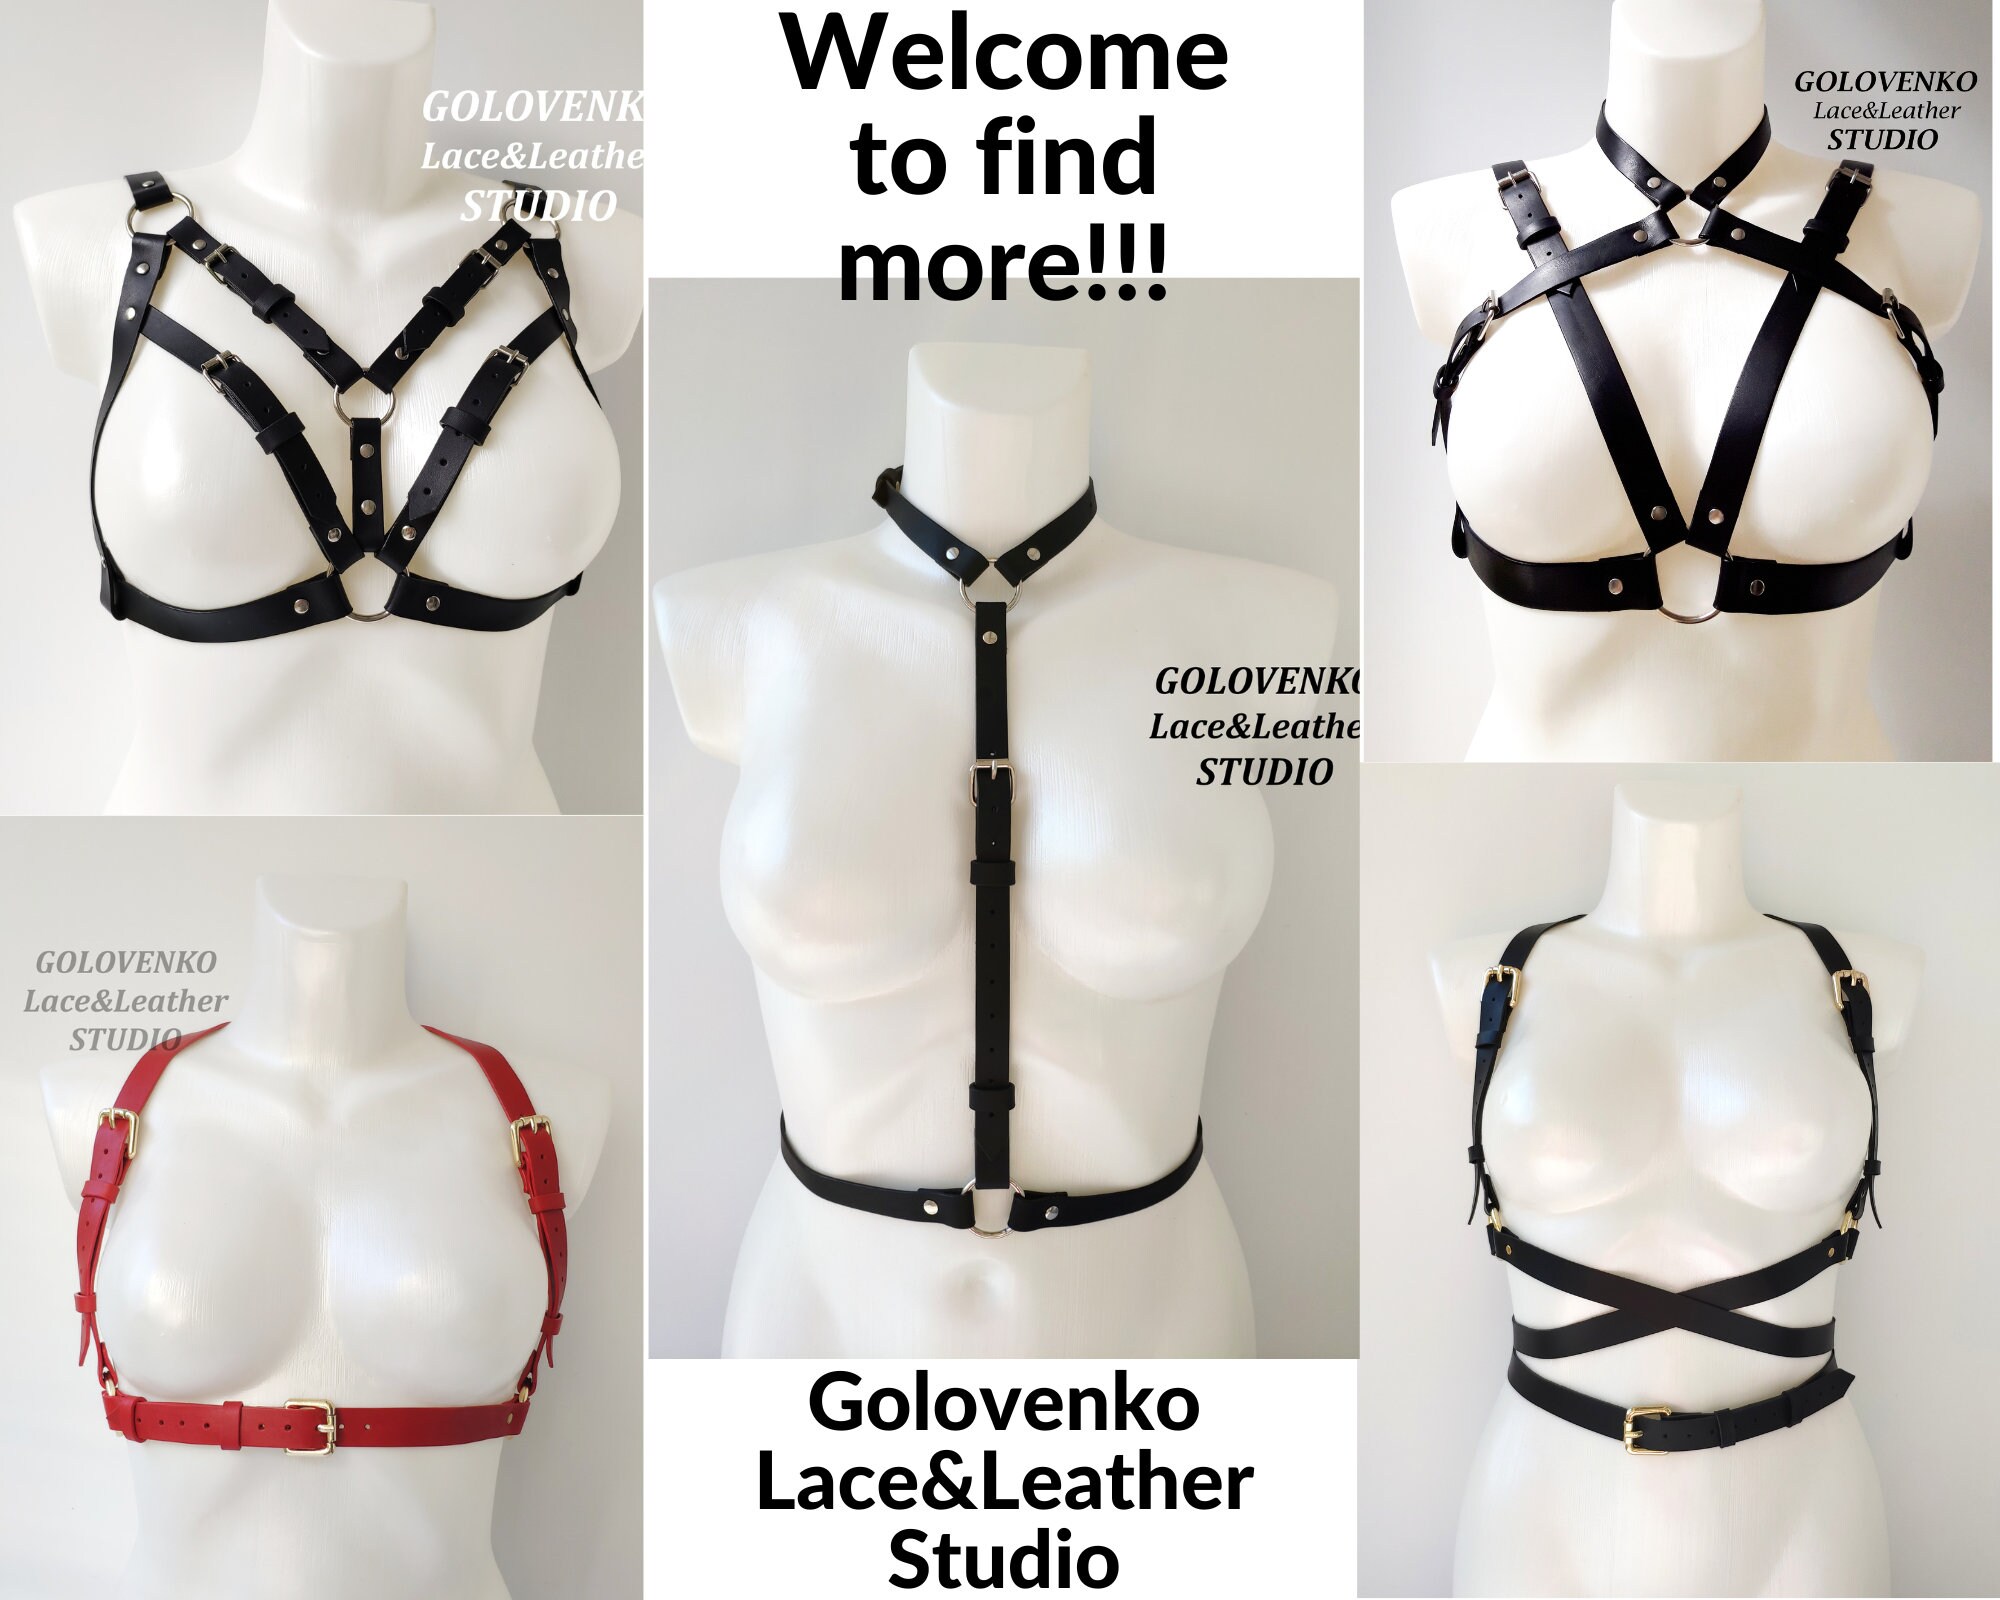 Genuine Leather Cage Bra, Bdsm Chest Harness, Women Bondage Open Bra,  Leather Cupless Bra, Leather Lingerie, Black Leather Breast Harness -   Canada